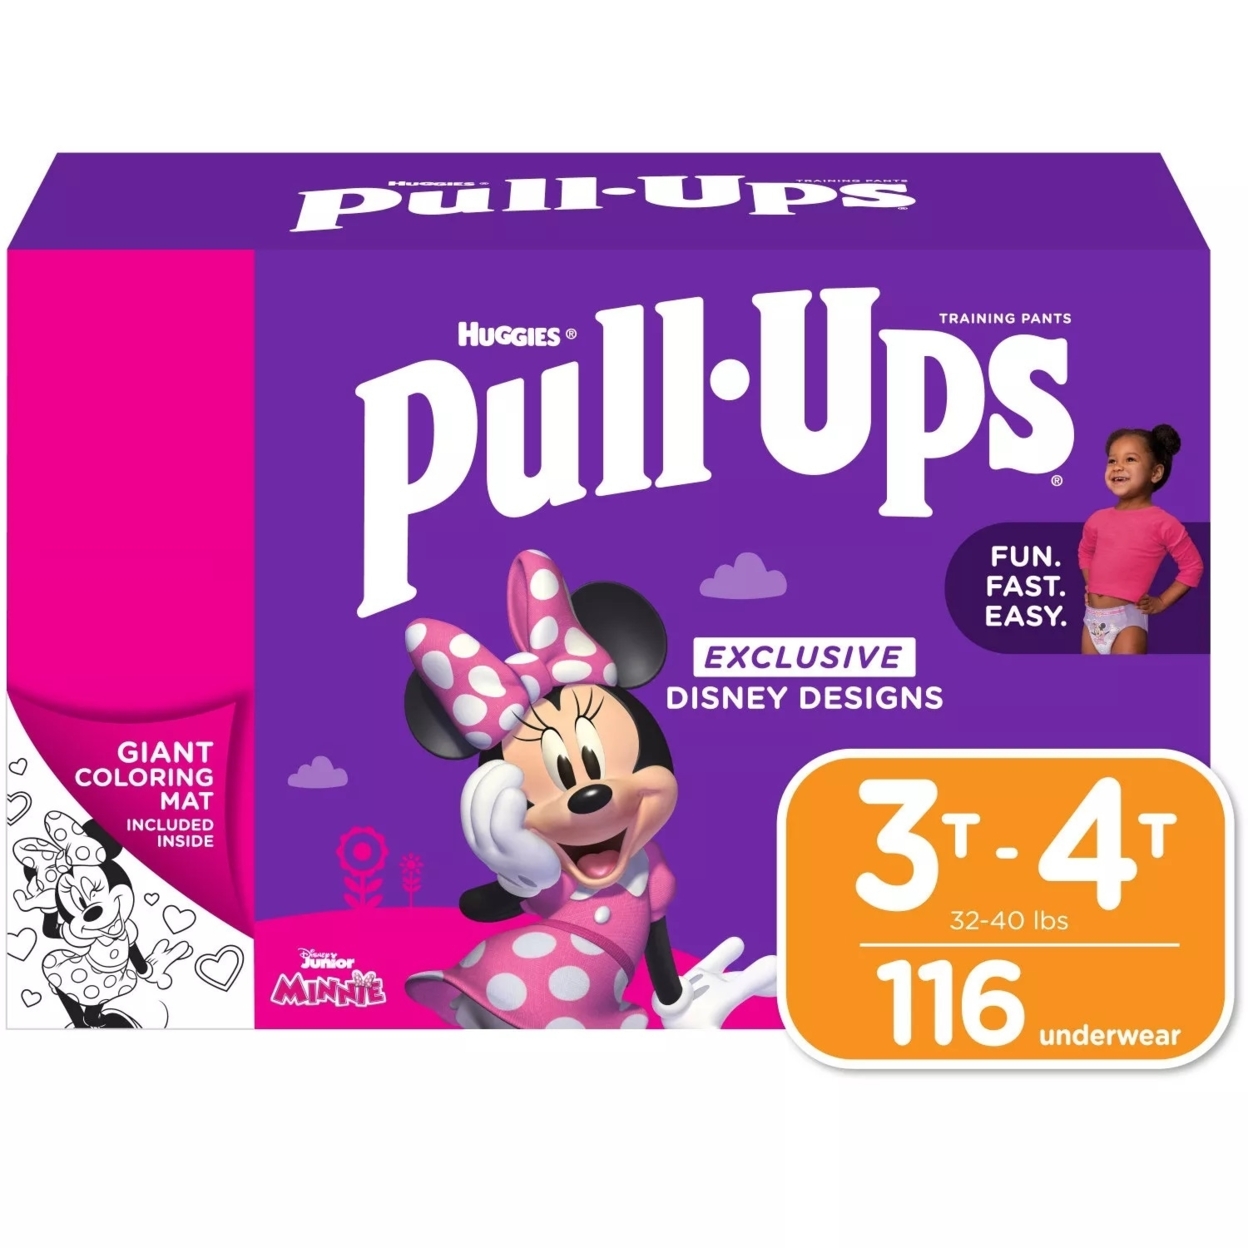 Huggies Pull-Ups Potty Training Pants For Girls, 3T-4T 32-40 Pounds (116 Count)